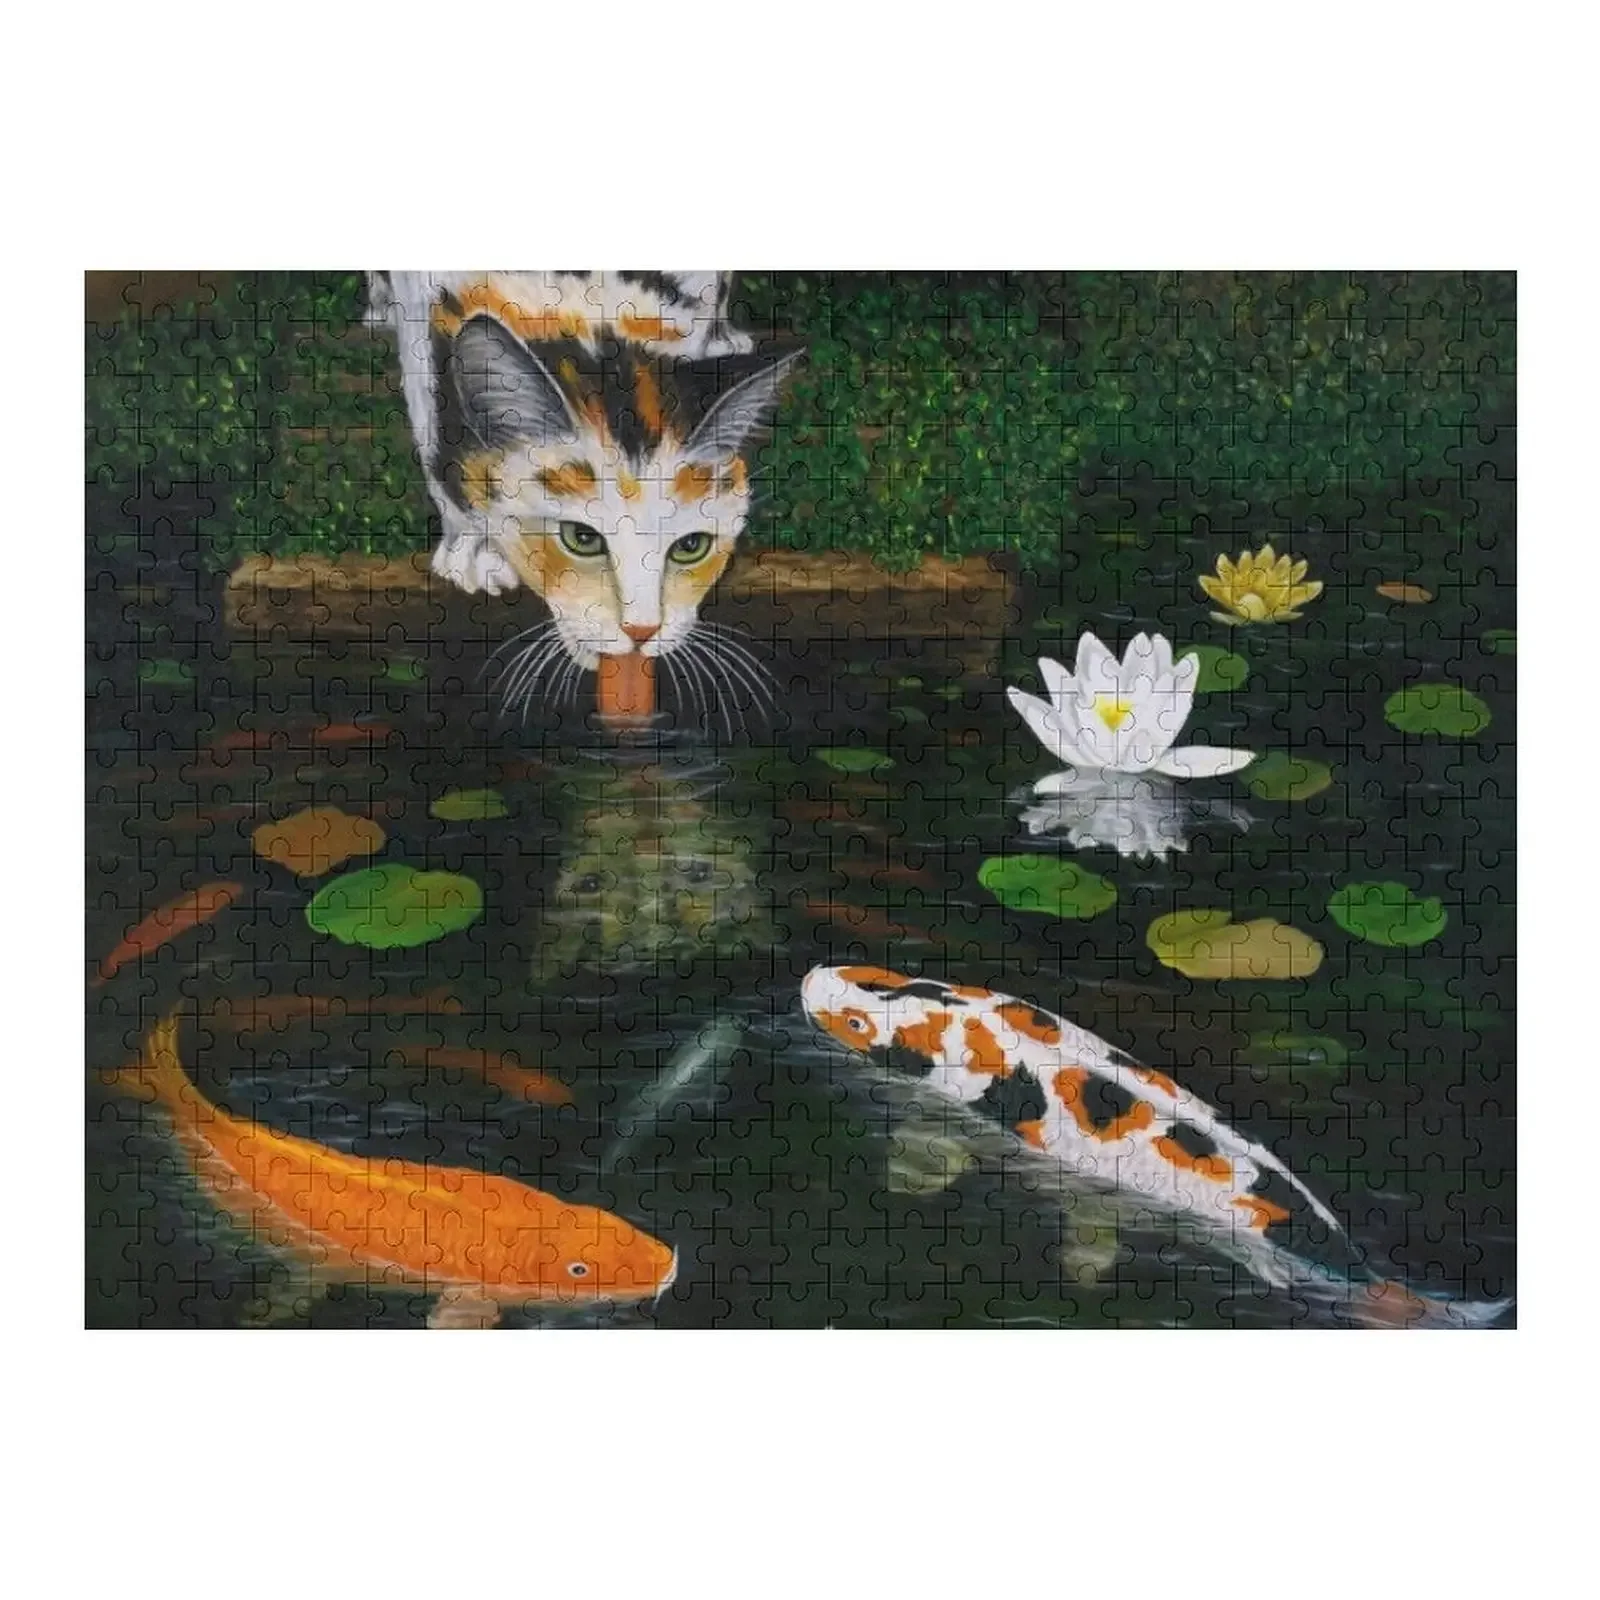 

Calico Cat and Koi Fish Jigsaw Puzzle Custom Wood Customized Gifts For Kids Customs With Photo Puzzle